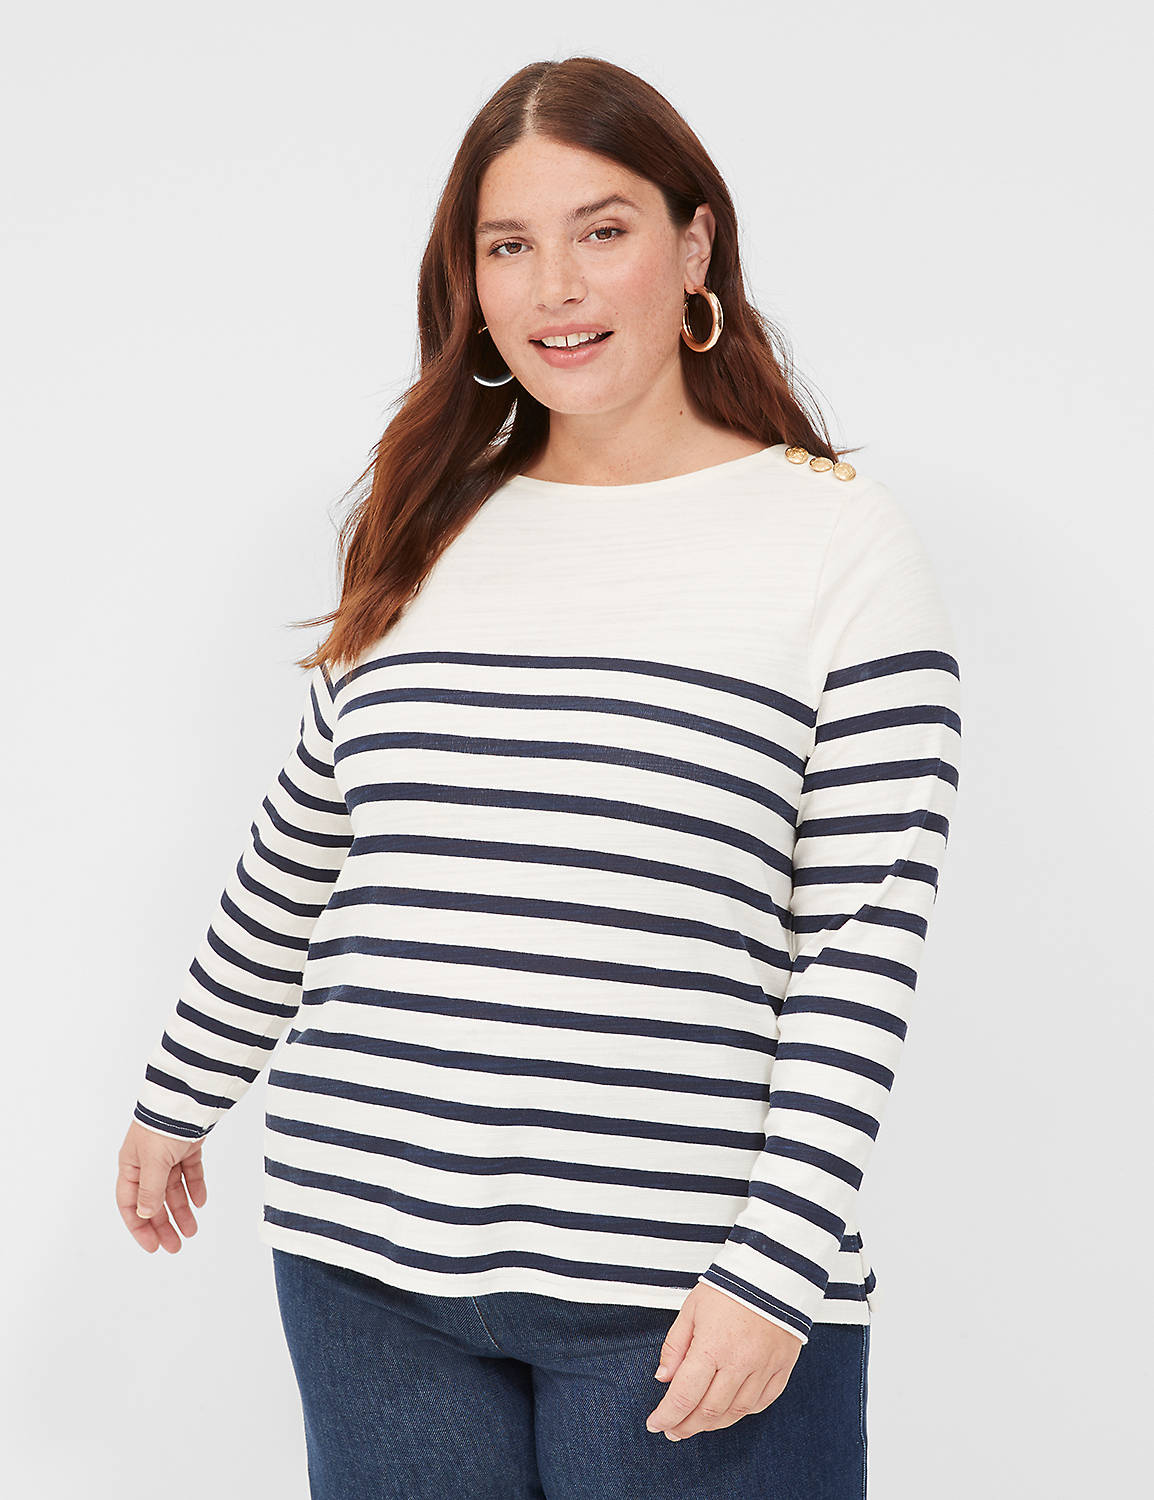 Classic Long Sleeve Boatneck Top 11 Product Image 1